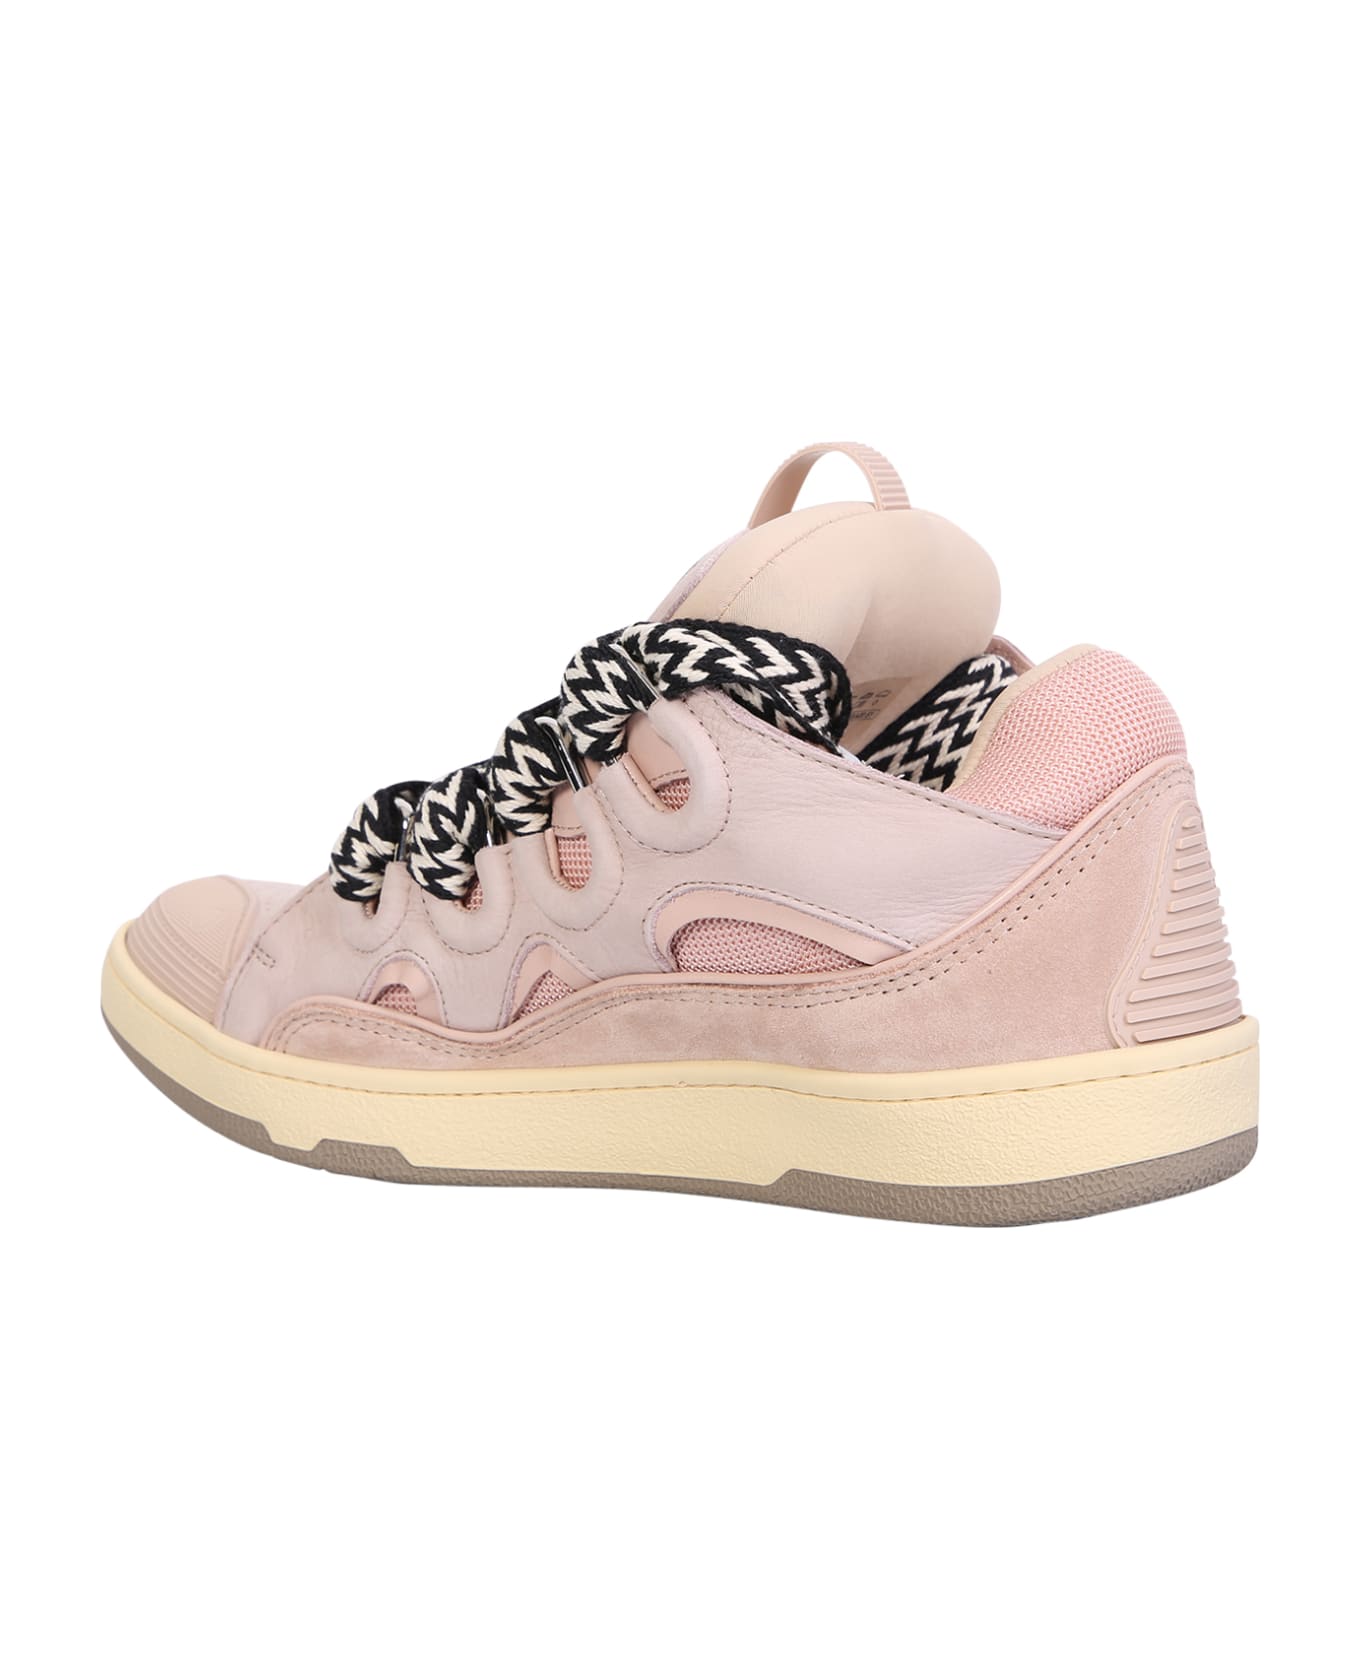 Lanvin 'curb' Sneakers - Pink